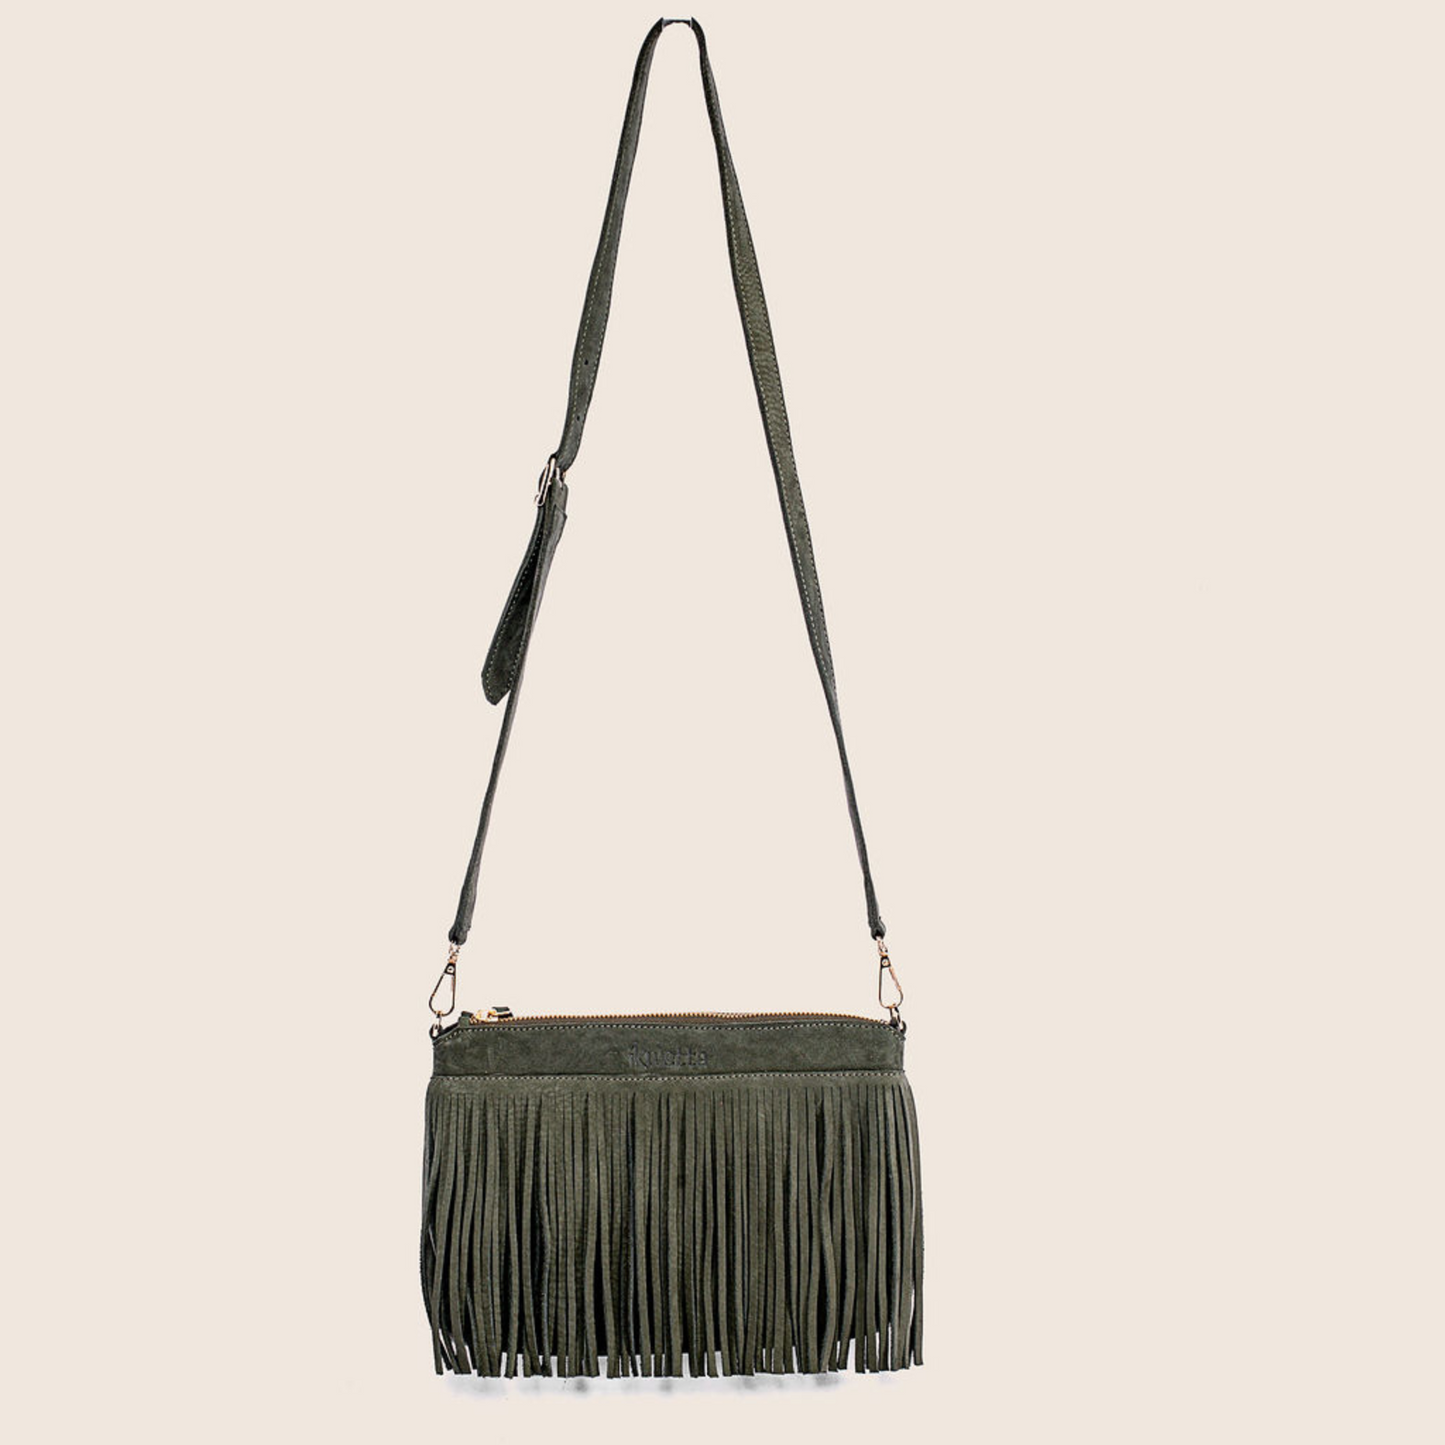 Fringe crossbody handcrafted in olive green hunting suede